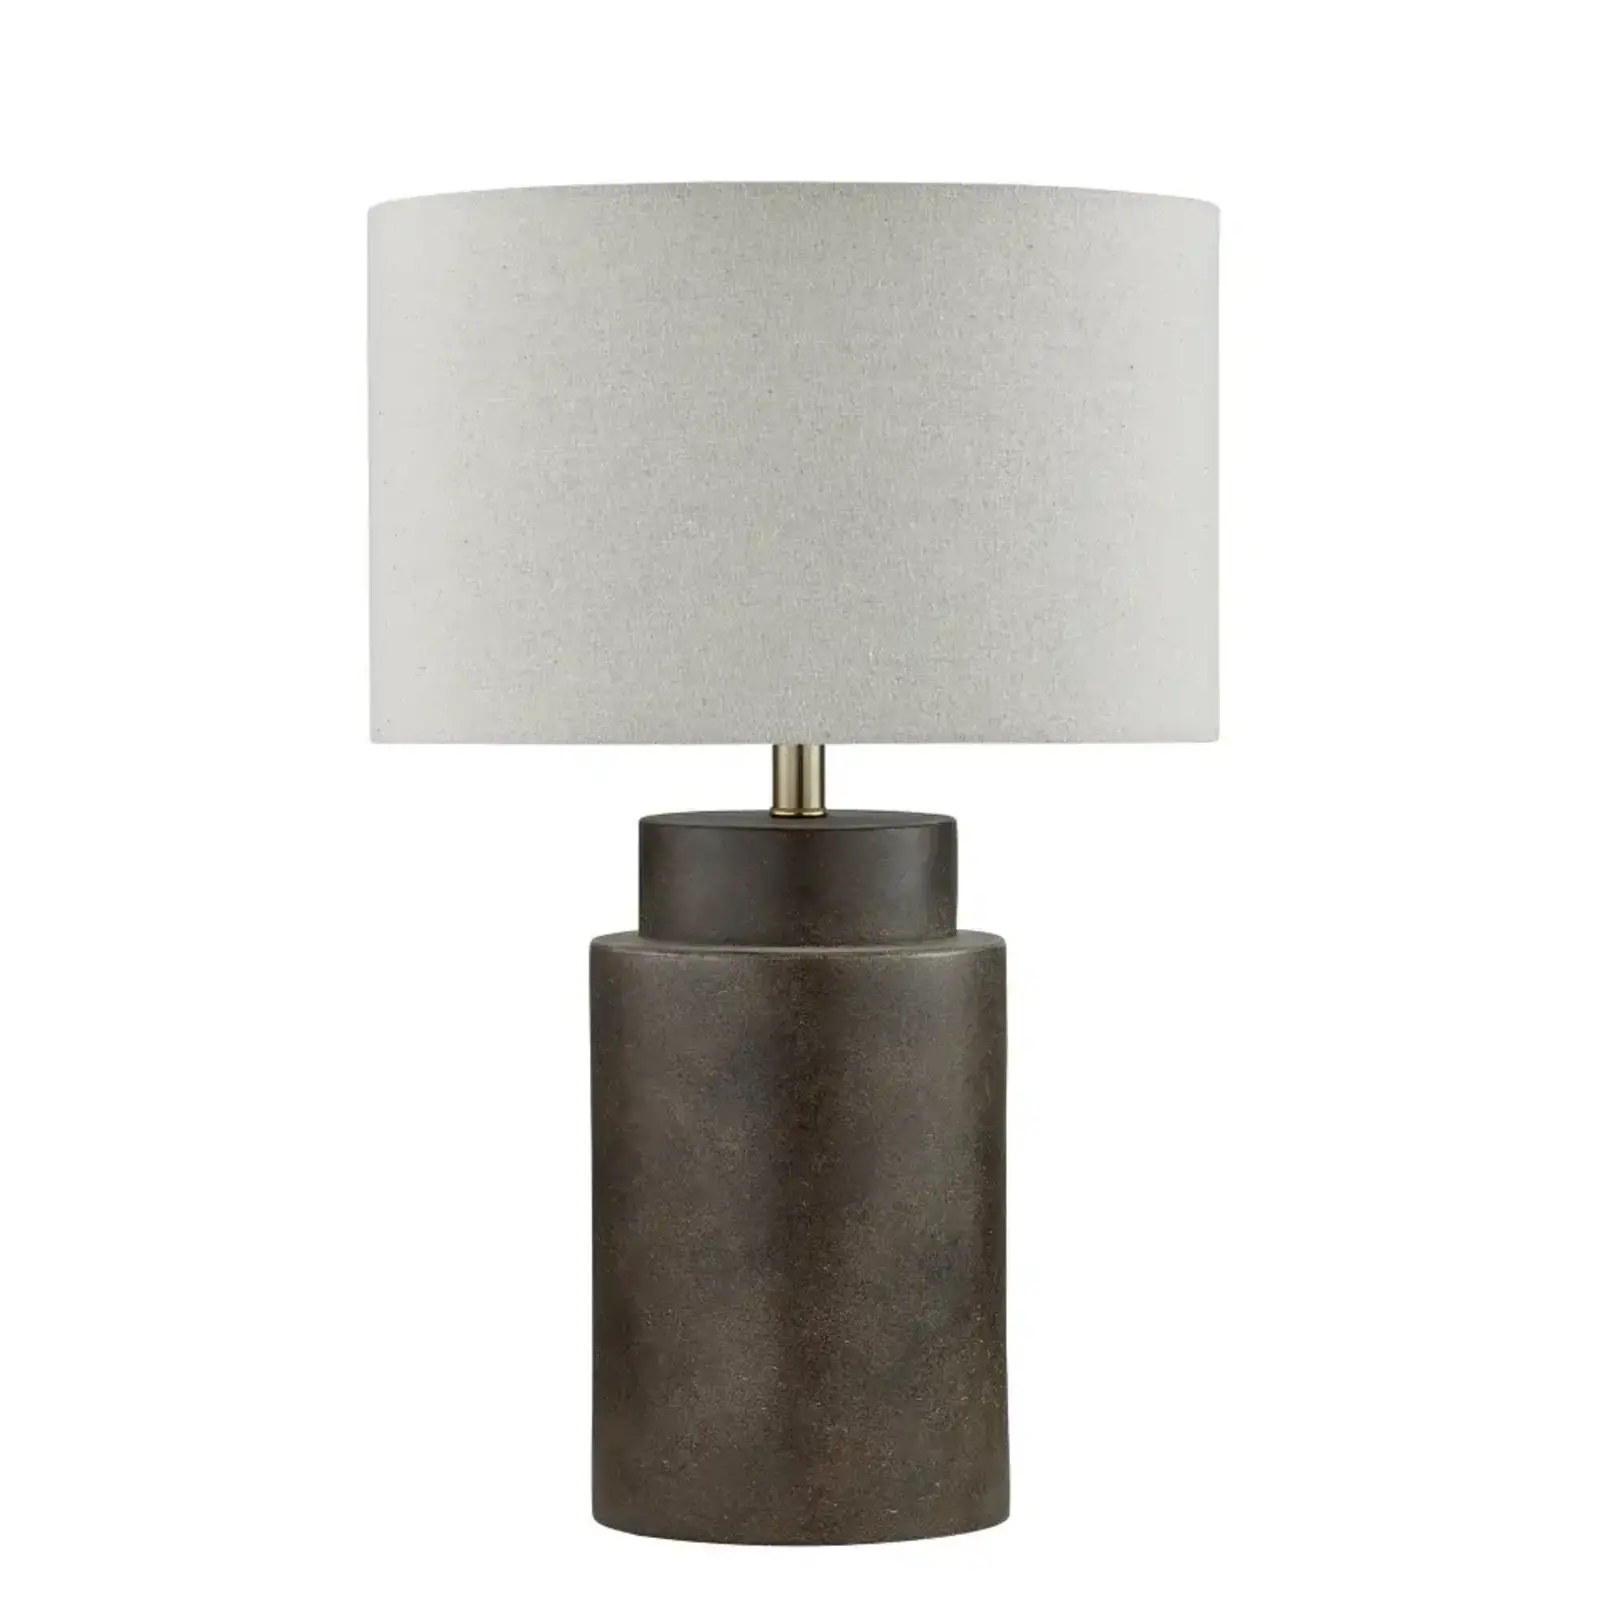 Forty West Blair Table Lamp   70970 loading=